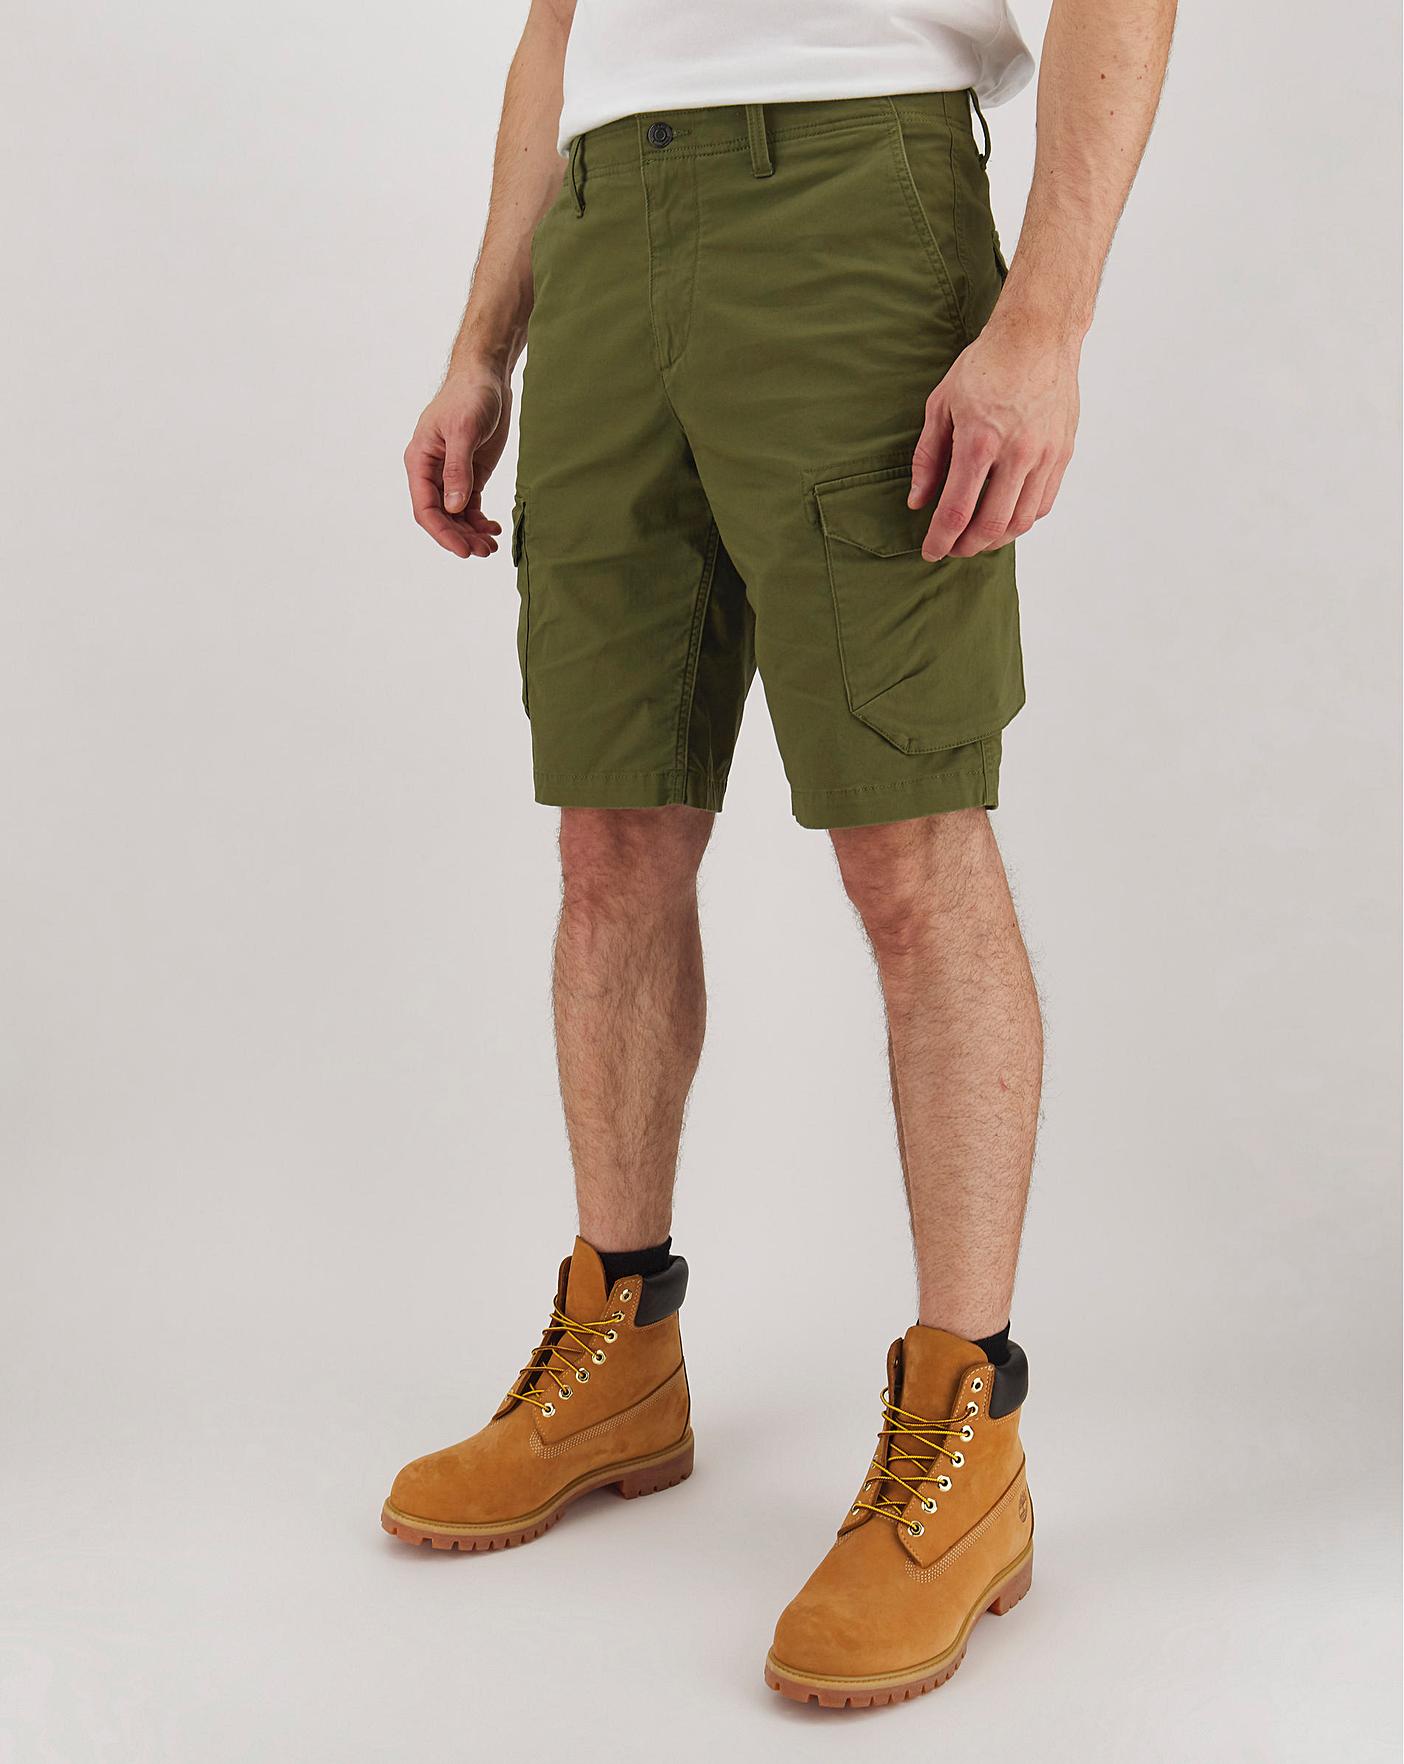 shorts with timberland boots